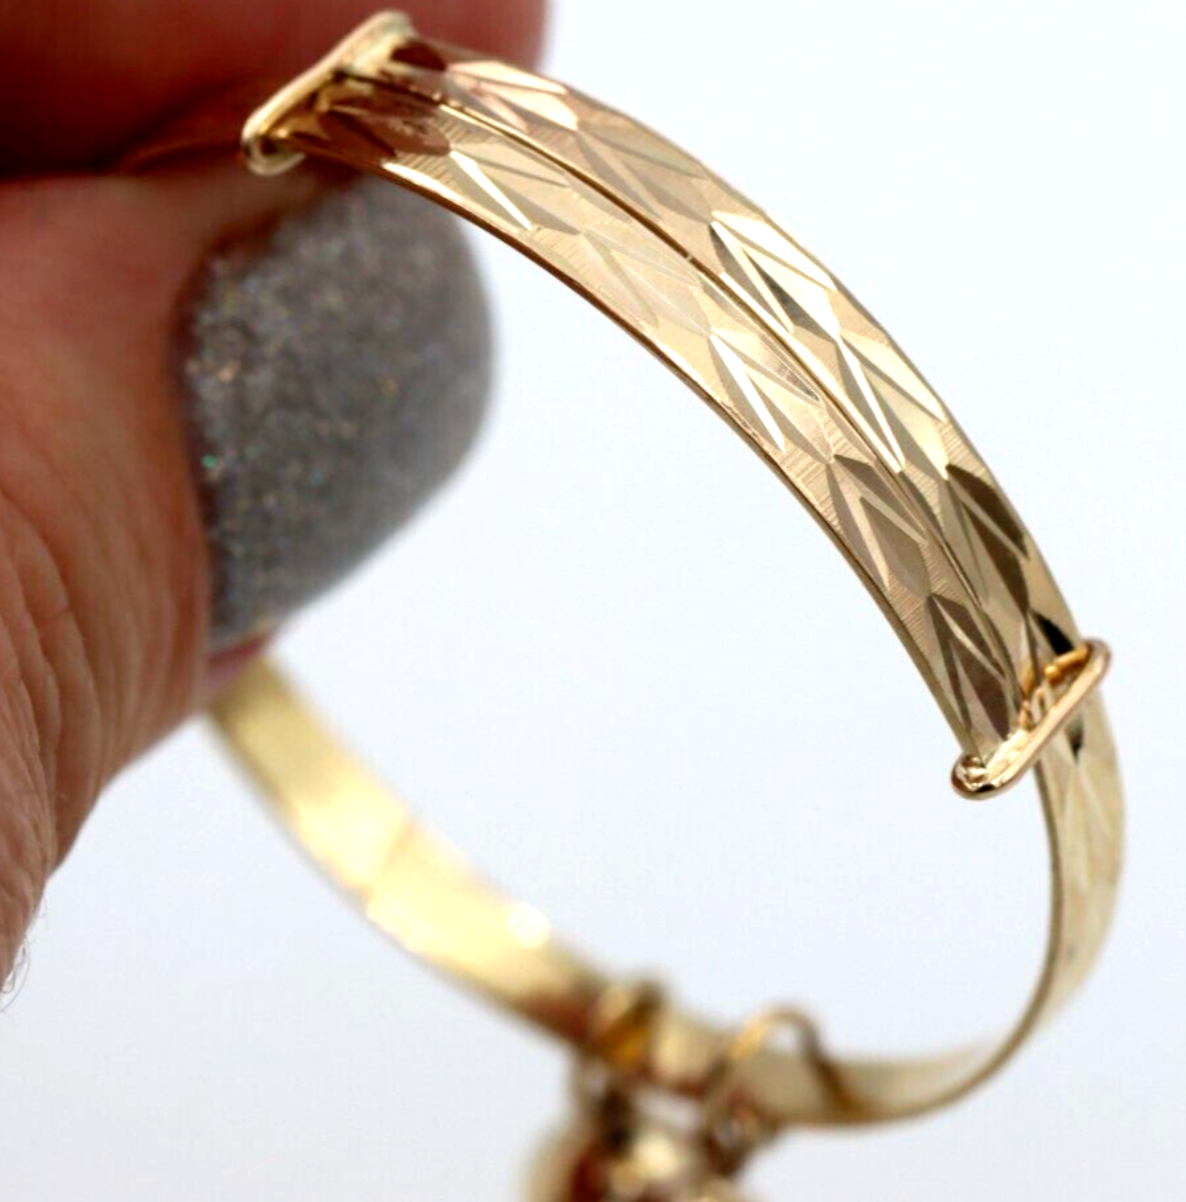 Genuine 9ct Yellow Gold 3.7mm wide Adjustable Baby Bangle with Bells